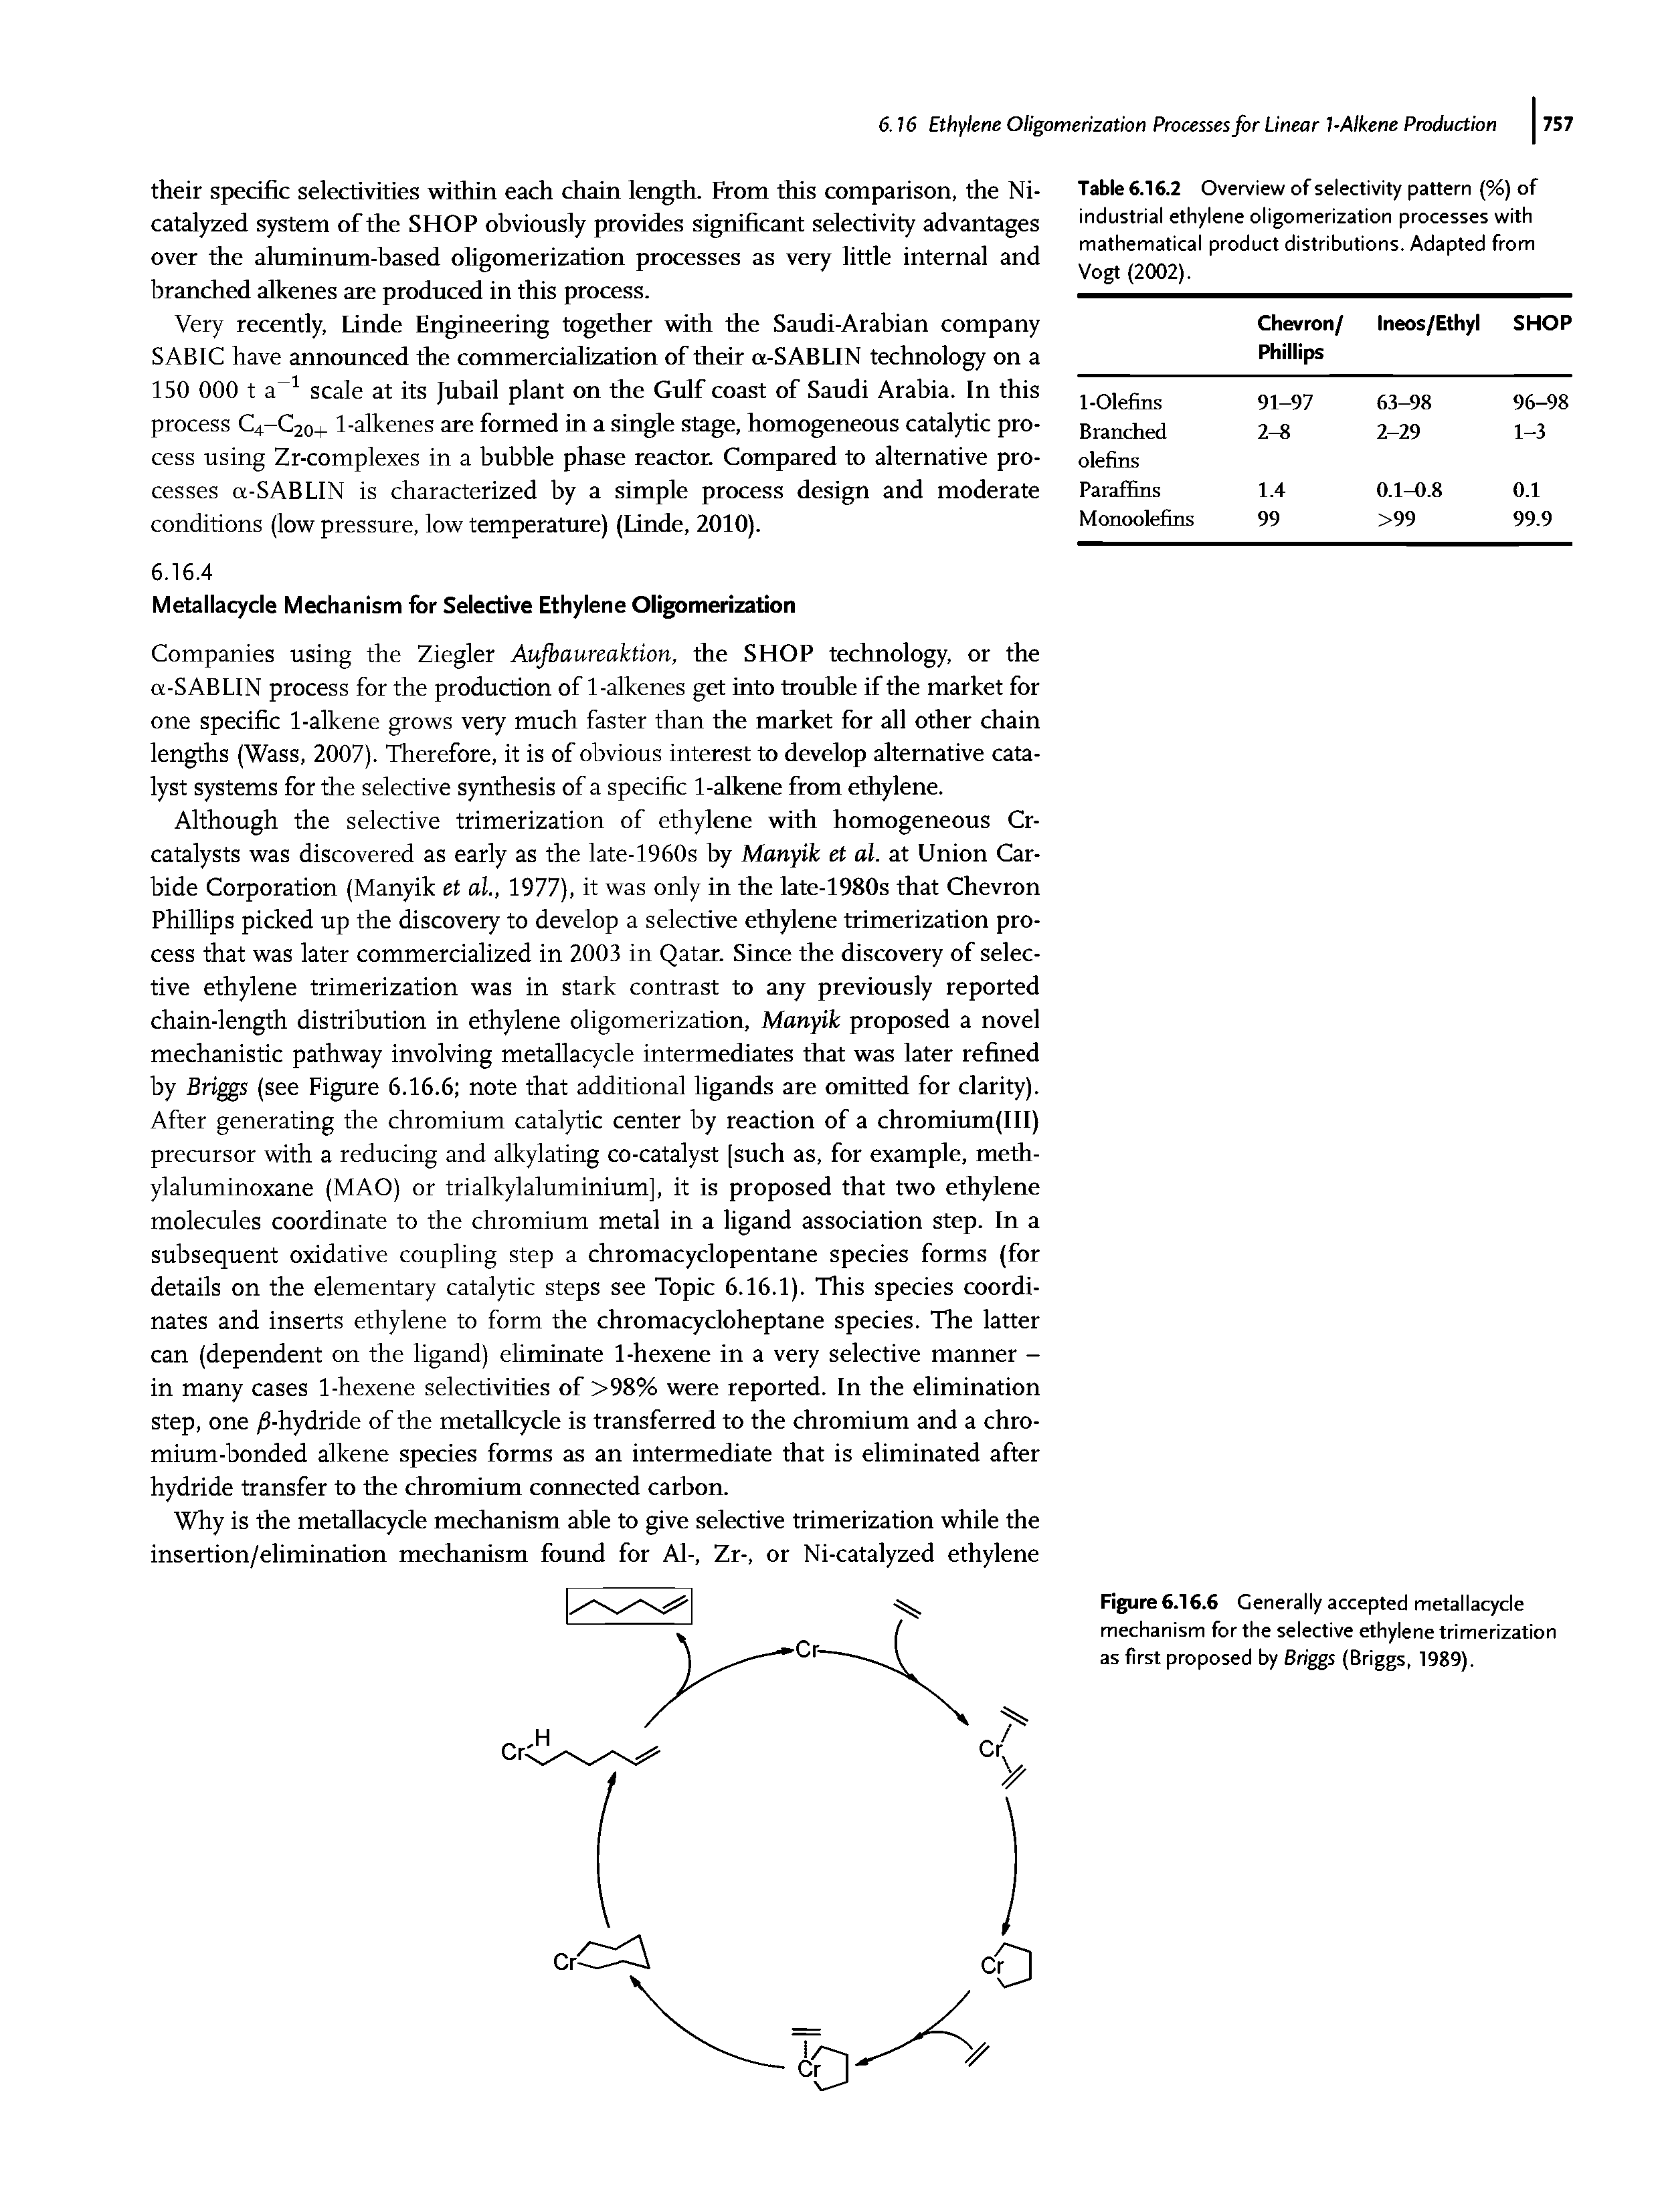 Figure 6.16.6 Generally accepted metallacycle mechanism for the selective ethylene trimerization as first proposed by Briggs (Briggs, 1989).